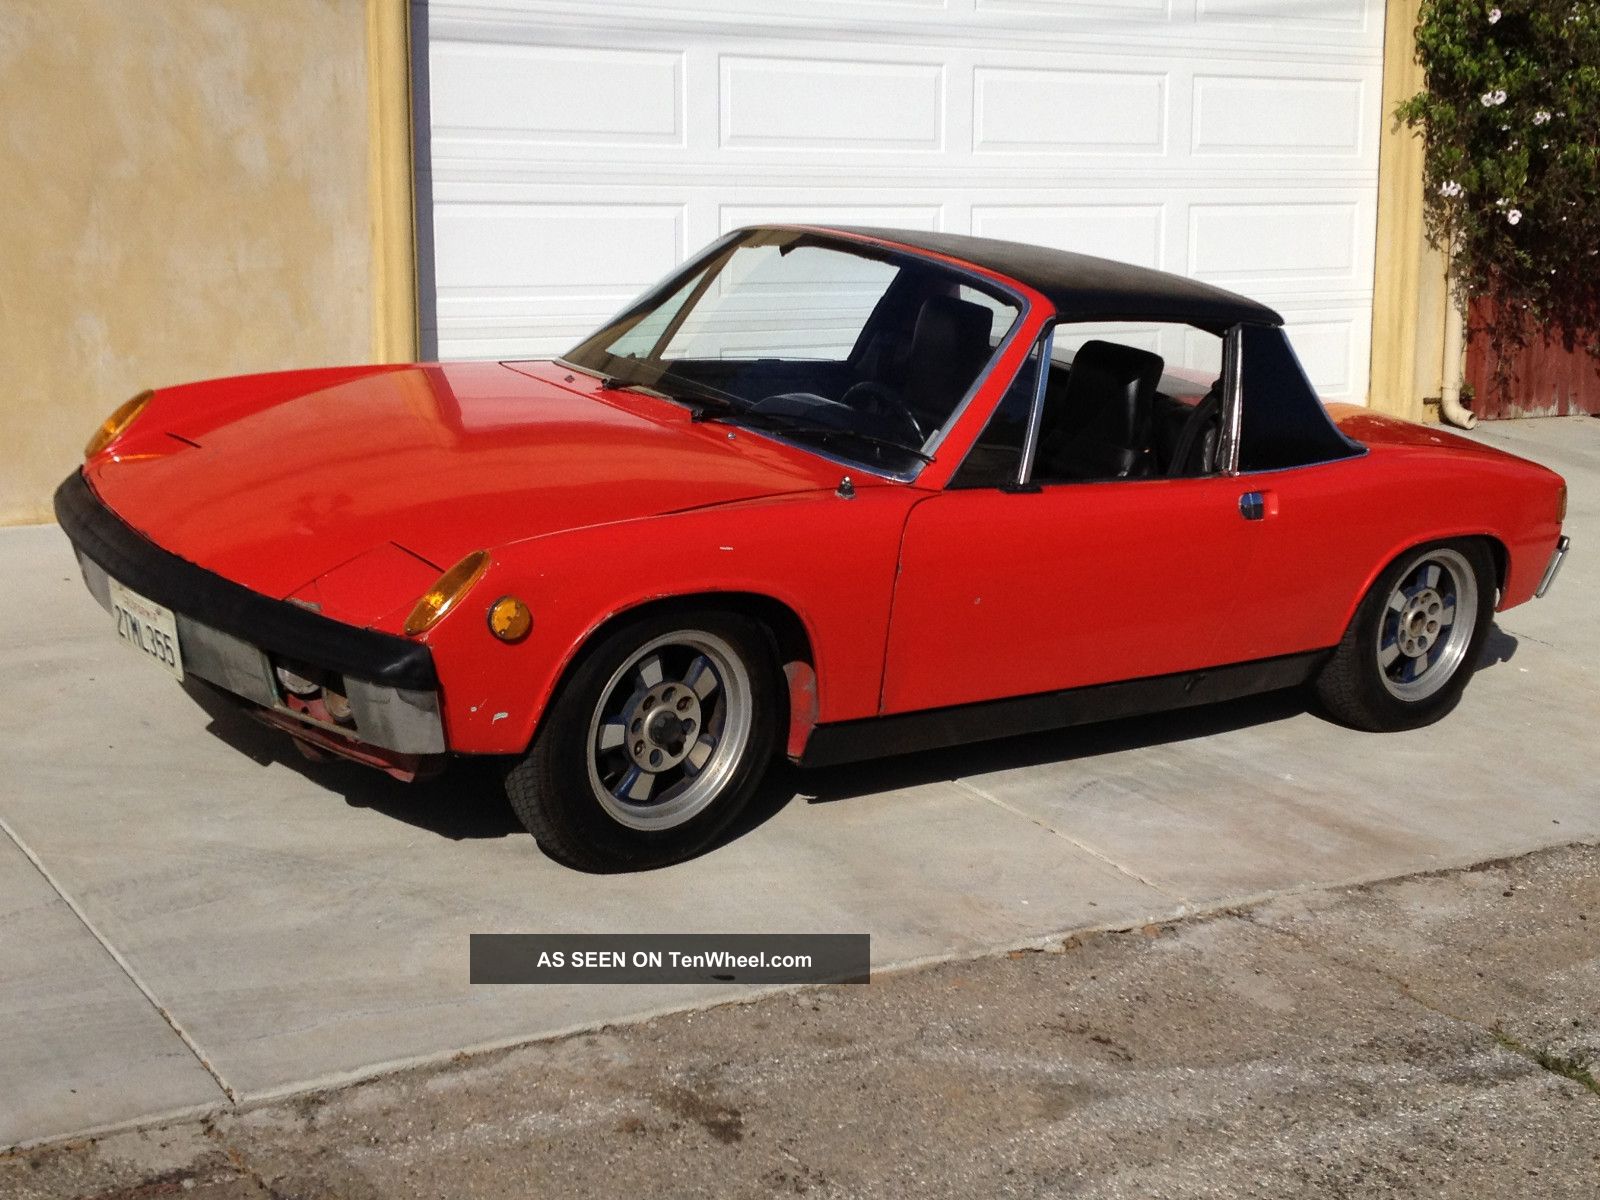 1973 Porsche 914 V8 350 Chevy With 500hp No Rust Real Sleeper Scariest Car Ever 914 photo